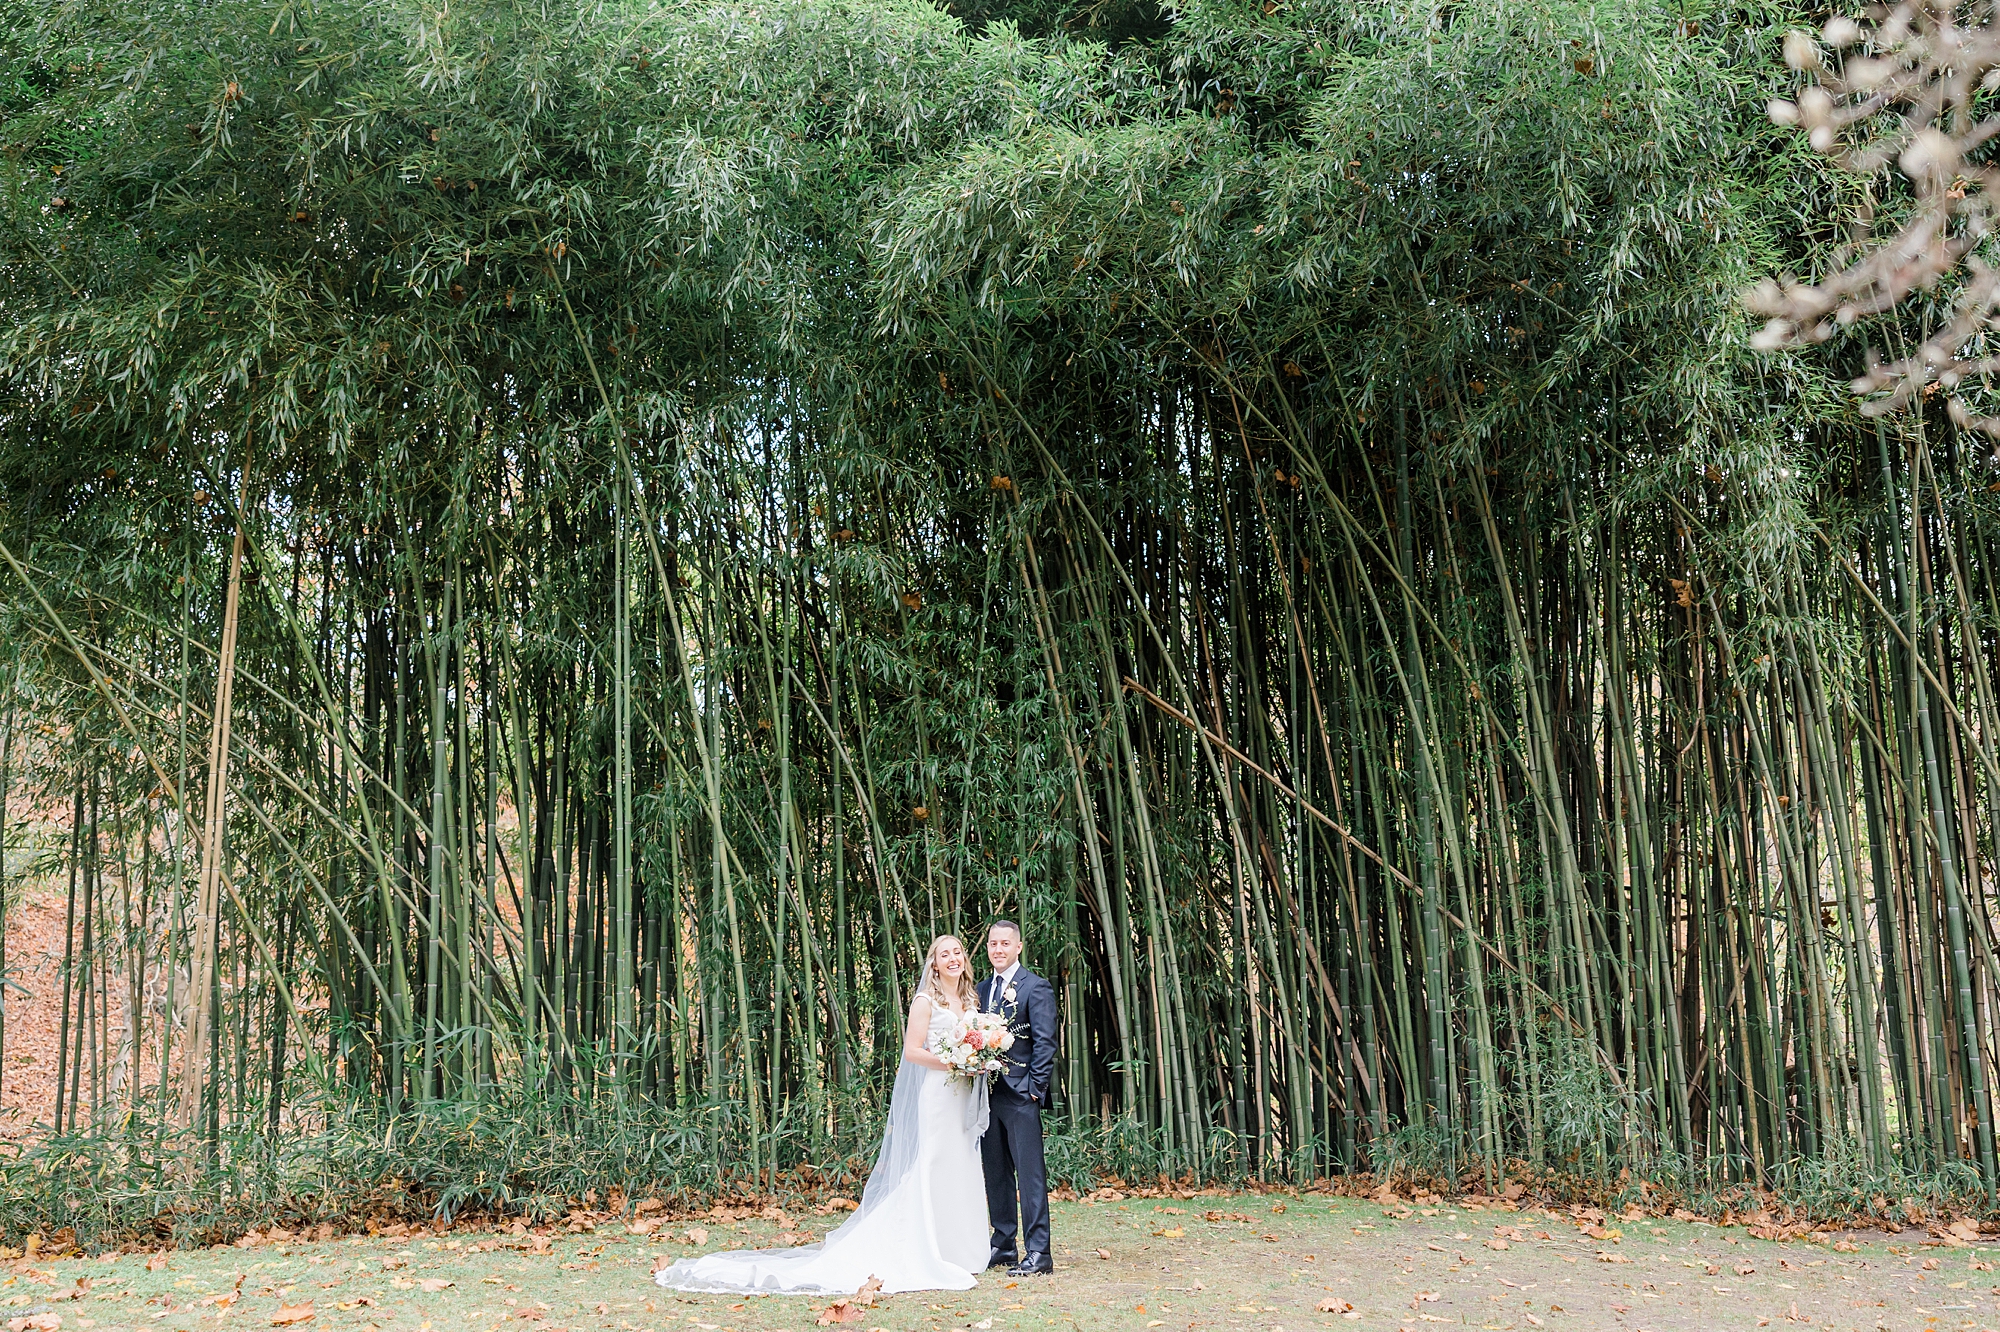 wedding portraits near bamboo trees at The Old Mill in Rose Valley